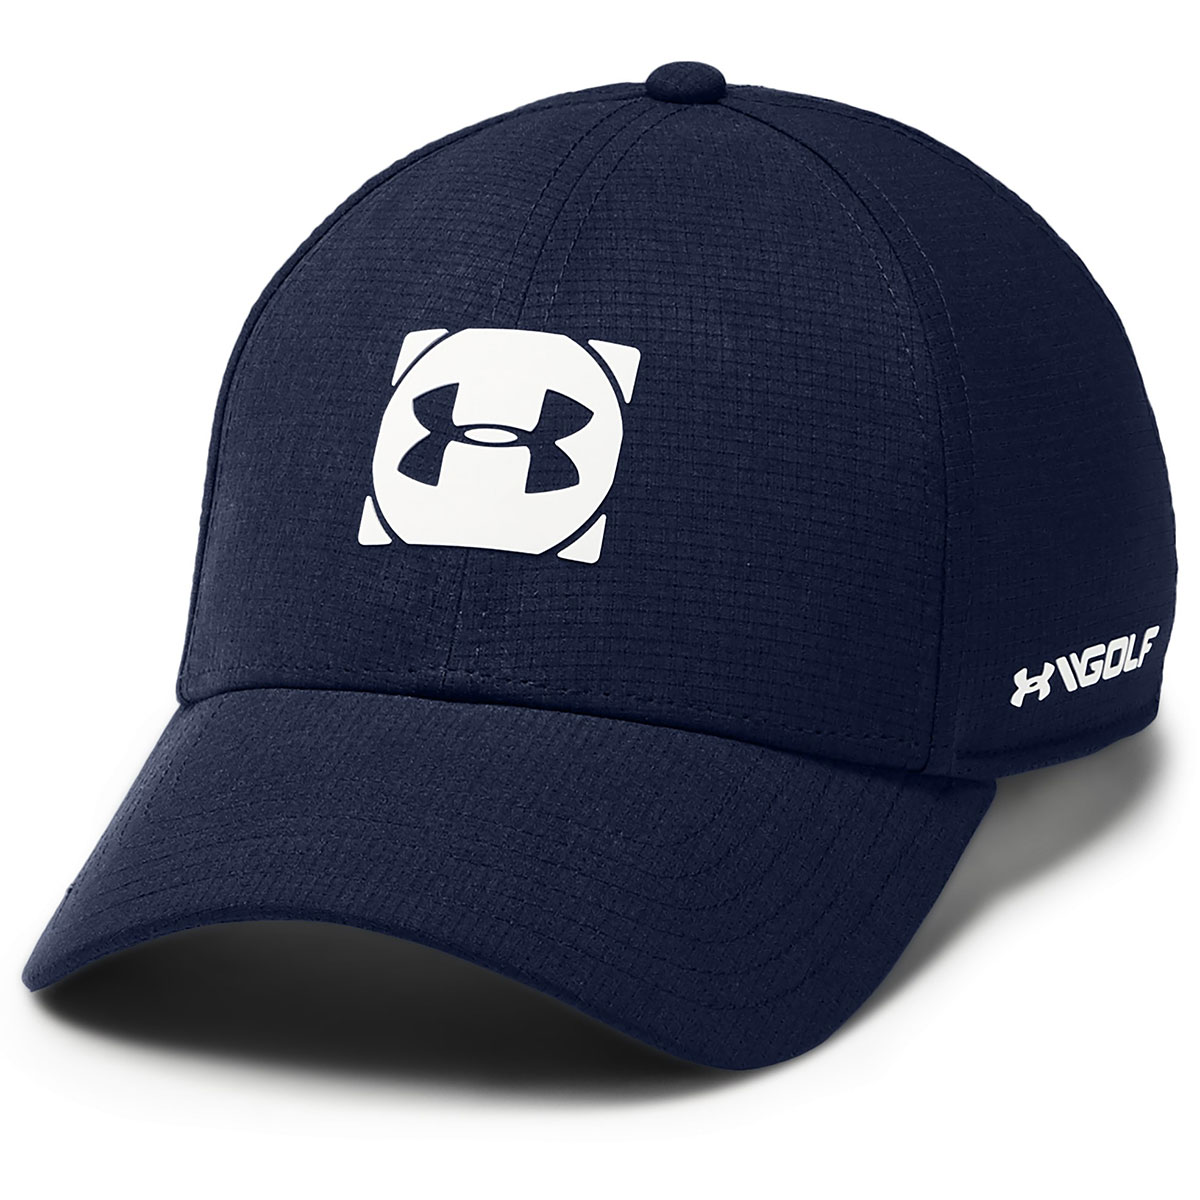 https://www.americangolf.co.uk/on/demandware.static/-/Sites-master-catalog/default/dw18a41563/images-square/zoom/342923-Under-Armour-Cap-Official-Tour-Academy-1.jpg